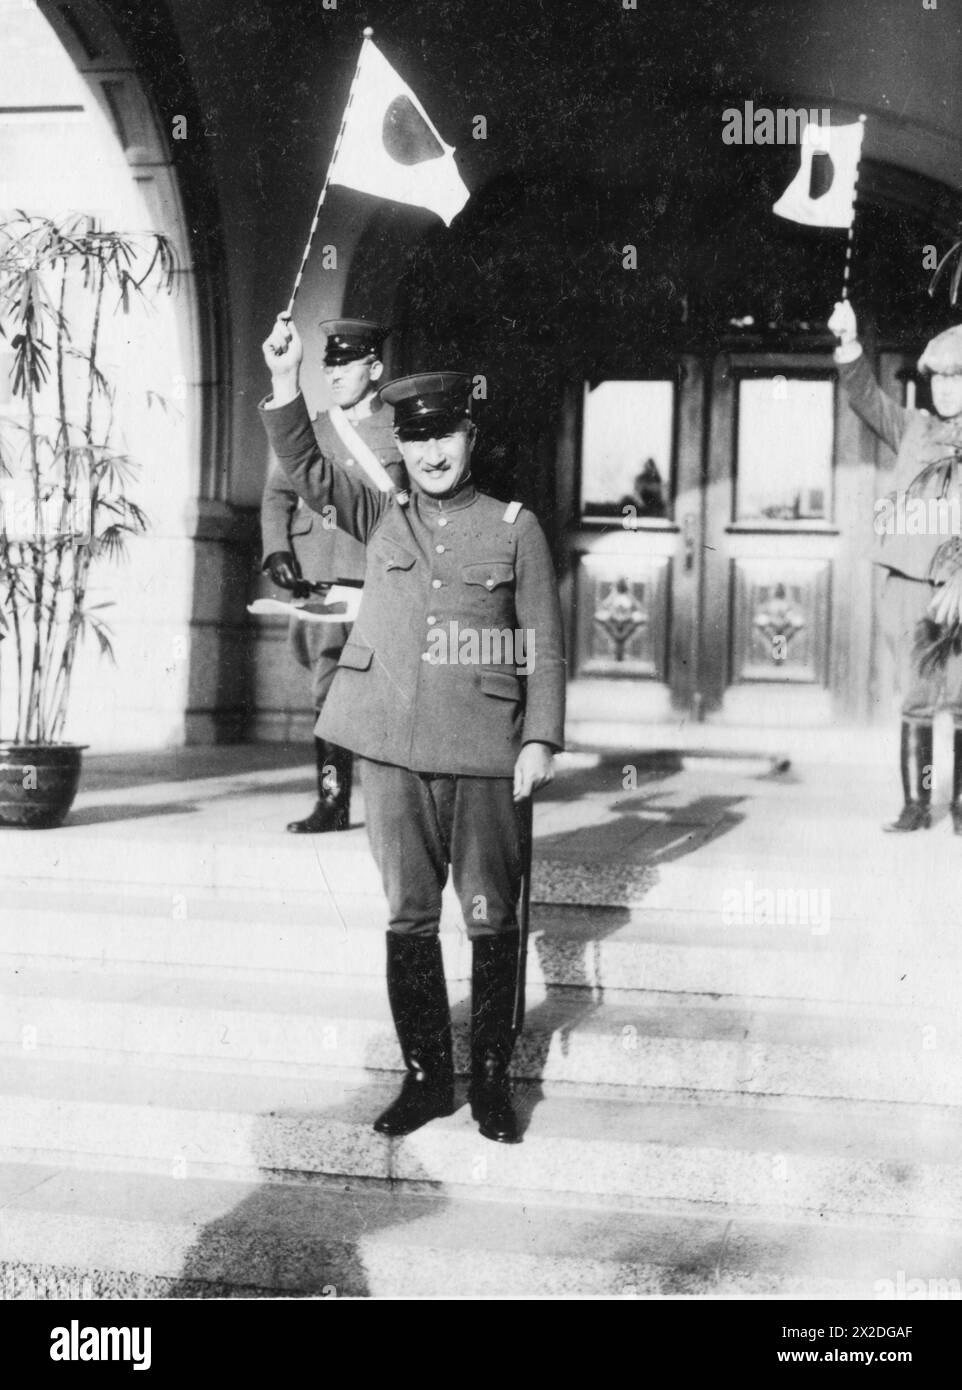 Terauchi Hisaichi, 8.8.1879 - 12.6.1946, general, ADDITIONAL-RIGHTS-CLEARANCE-INFO-NOT-AVAILABLE Stock Photo